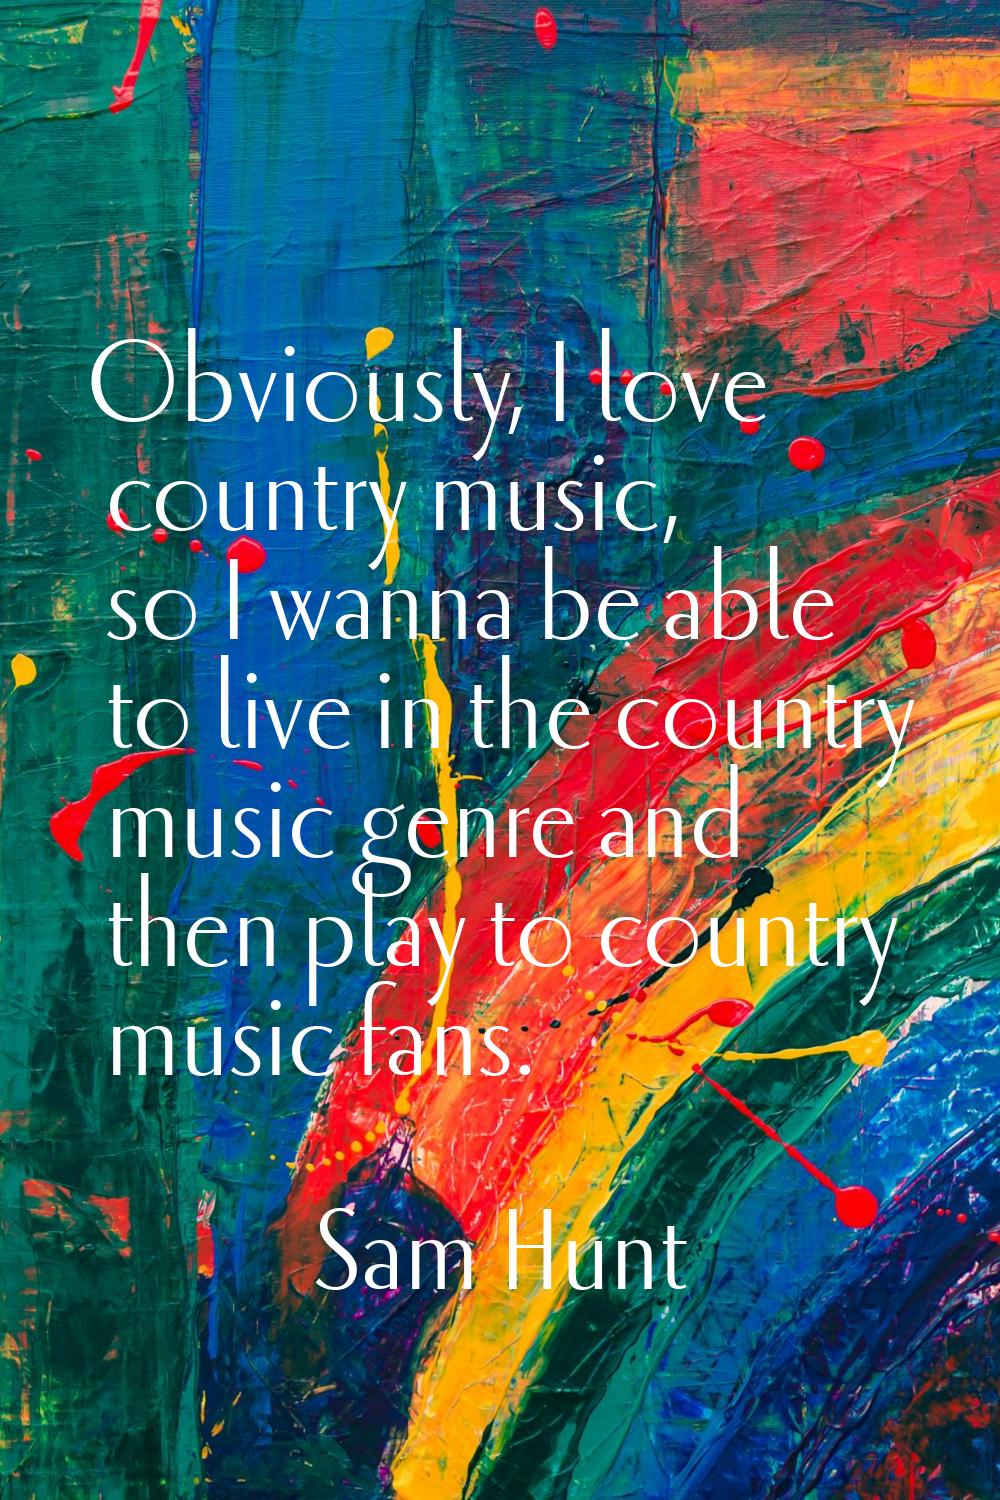 Obviously, I love country music, so I wanna be able to live in the country music genre and then pla